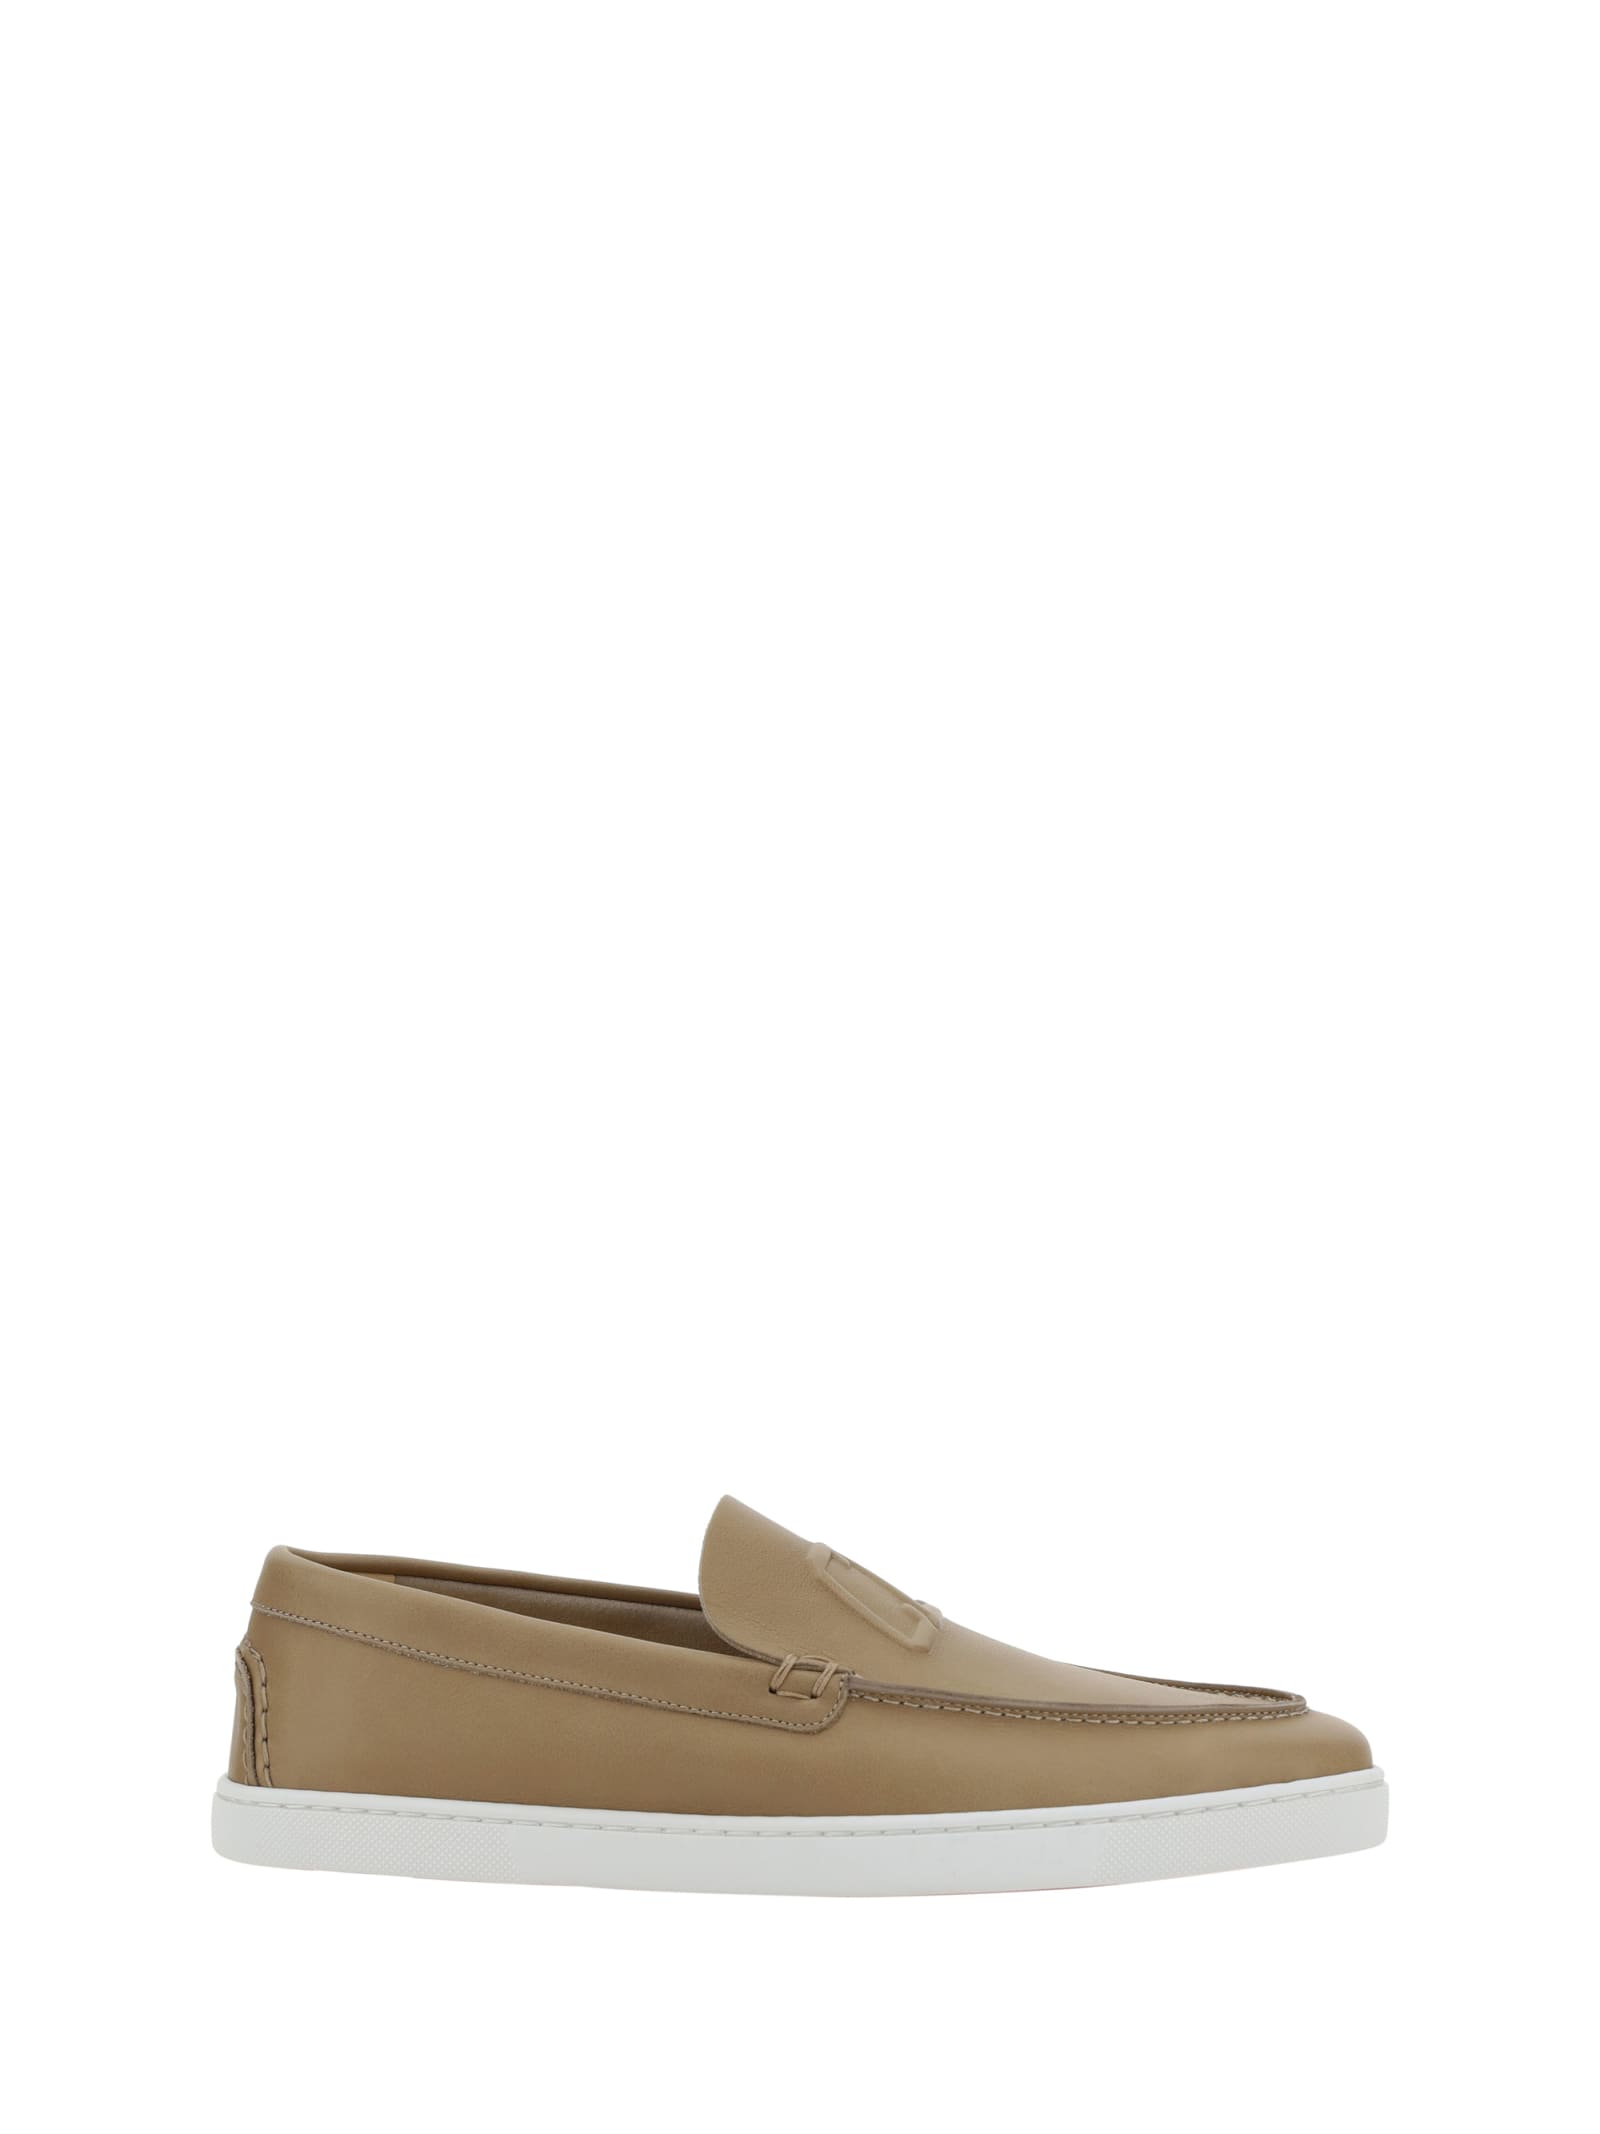 Shop Christian Louboutin Varsiboat Loafers In Saharienne